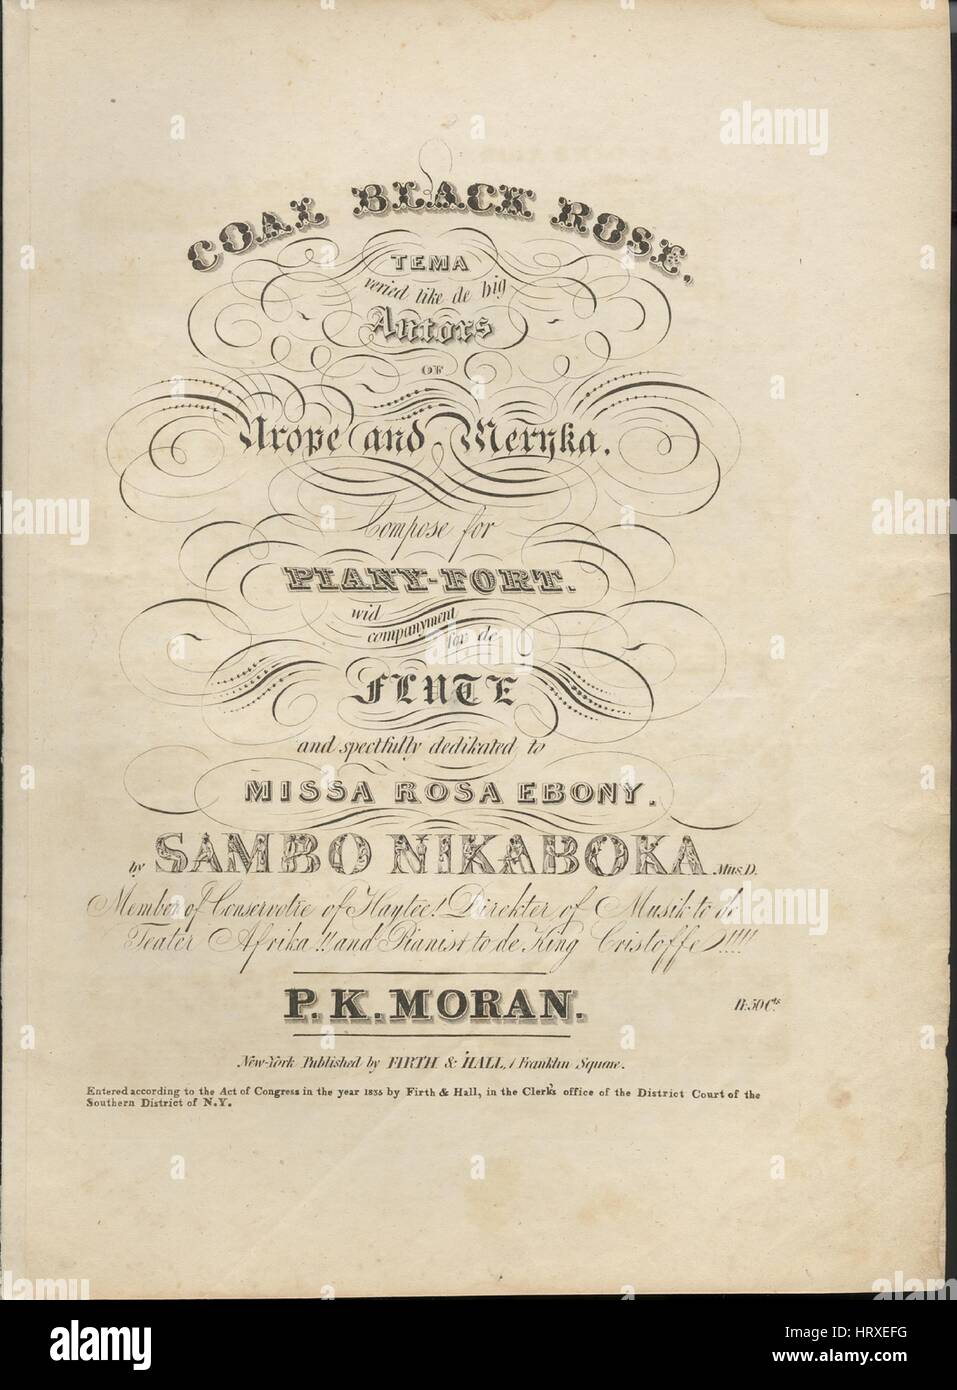 Sheet music cover image of the song 'Coal Black Rose Tema veried like de big Autors of [?]', with original authorship notes reading 'Compose for Piani-Fort wid companyment for de Flute by Sambo Nikaboka, Mus D, Member of Conservotre of Haytee!  Direkter of Musik to de Teater Afrika!! and Pianist to de King Cristoffe!!!! [sic]', United States, 1835. The publisher is listed as 'Firth and Hall, 1 Franklin Square', the form of composition is 'sectional, with programmatic annotations (e.g., Imbitation of Massa Julus Ets, Imbitation of Massa Playell, etc.) [sic]', the instrumentation is 'piano', the Stock Photo